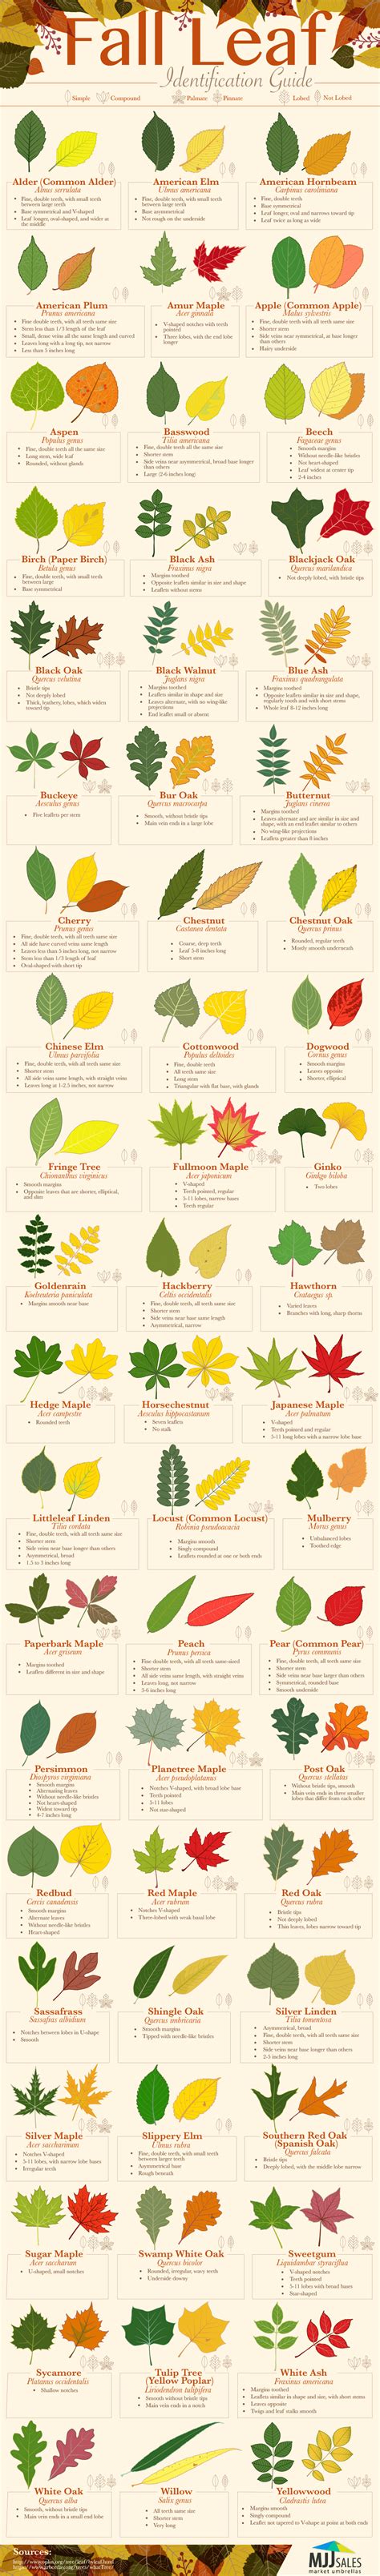 fall leaf identification guide infographic visualistan